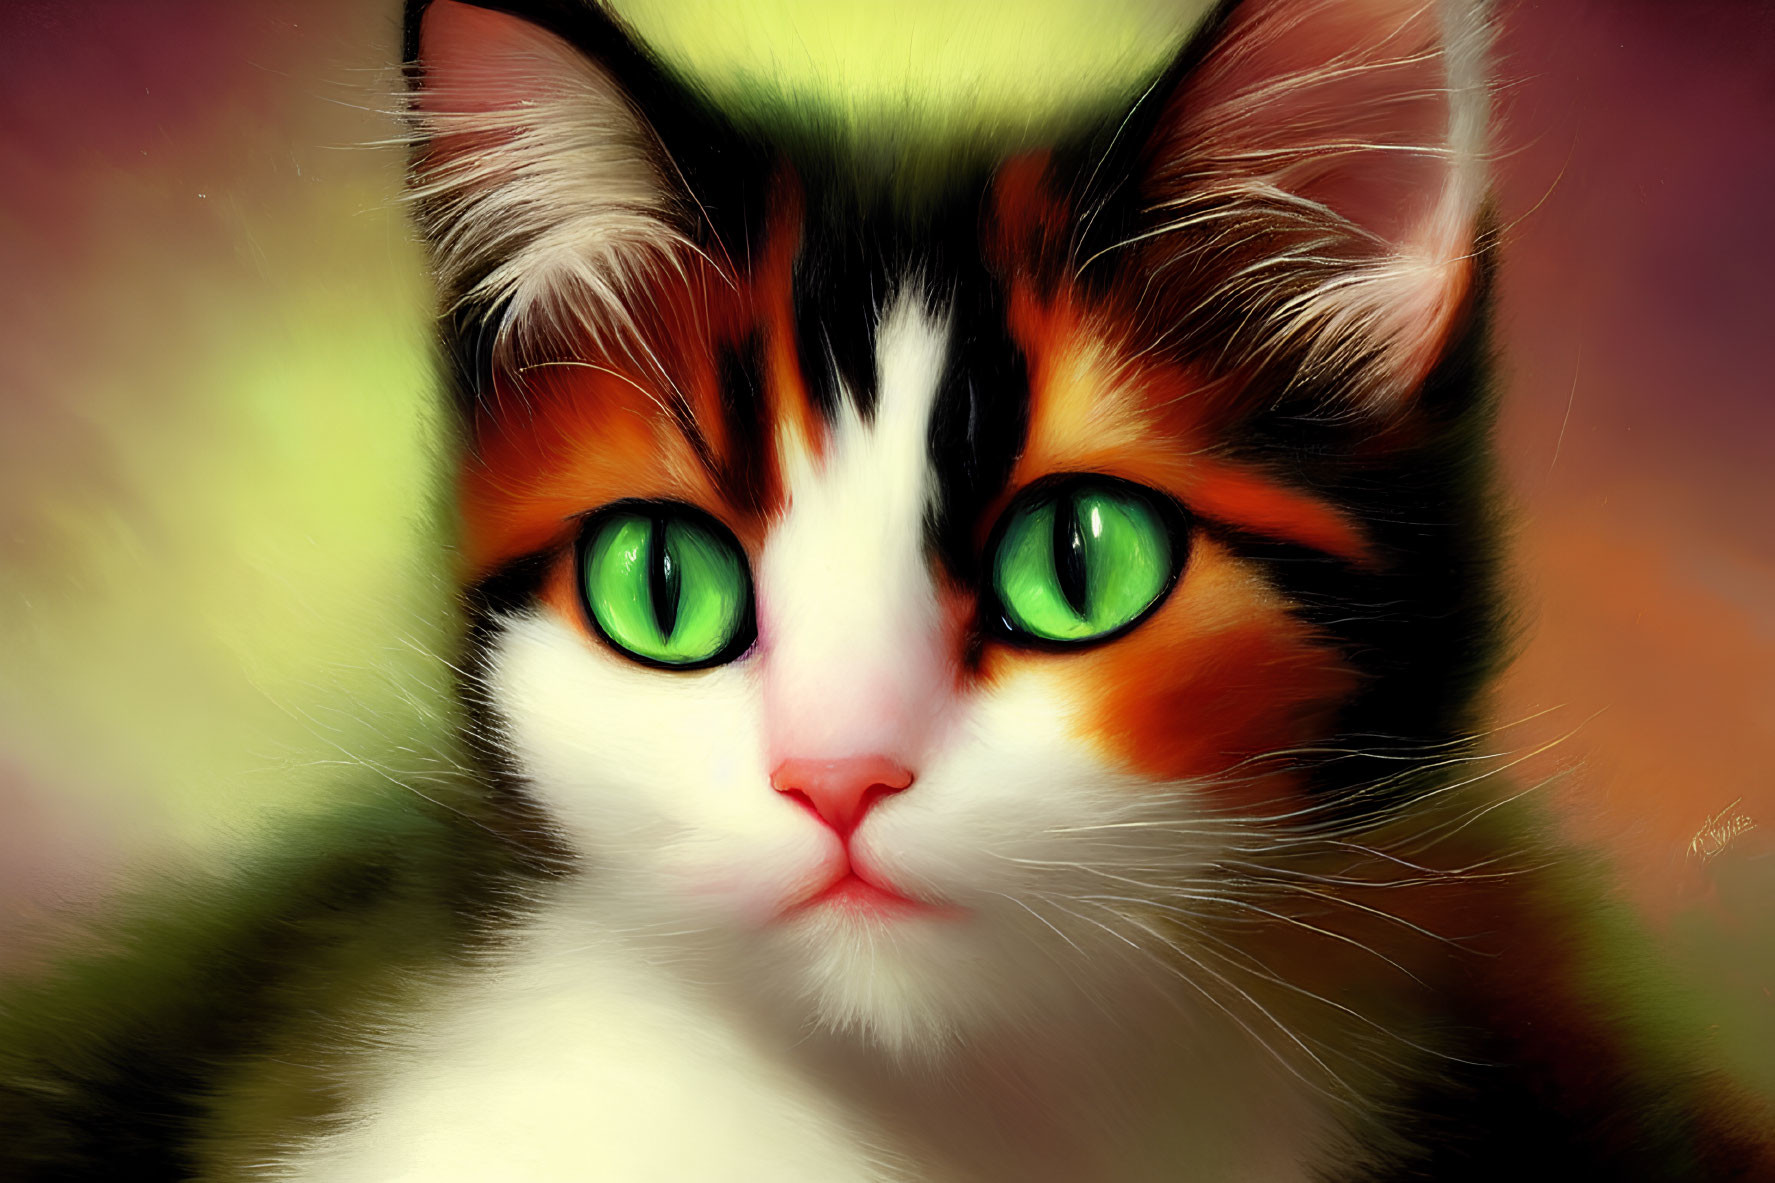 Calico Cat Close-Up Portrait with Green Eyes in Warm Tones